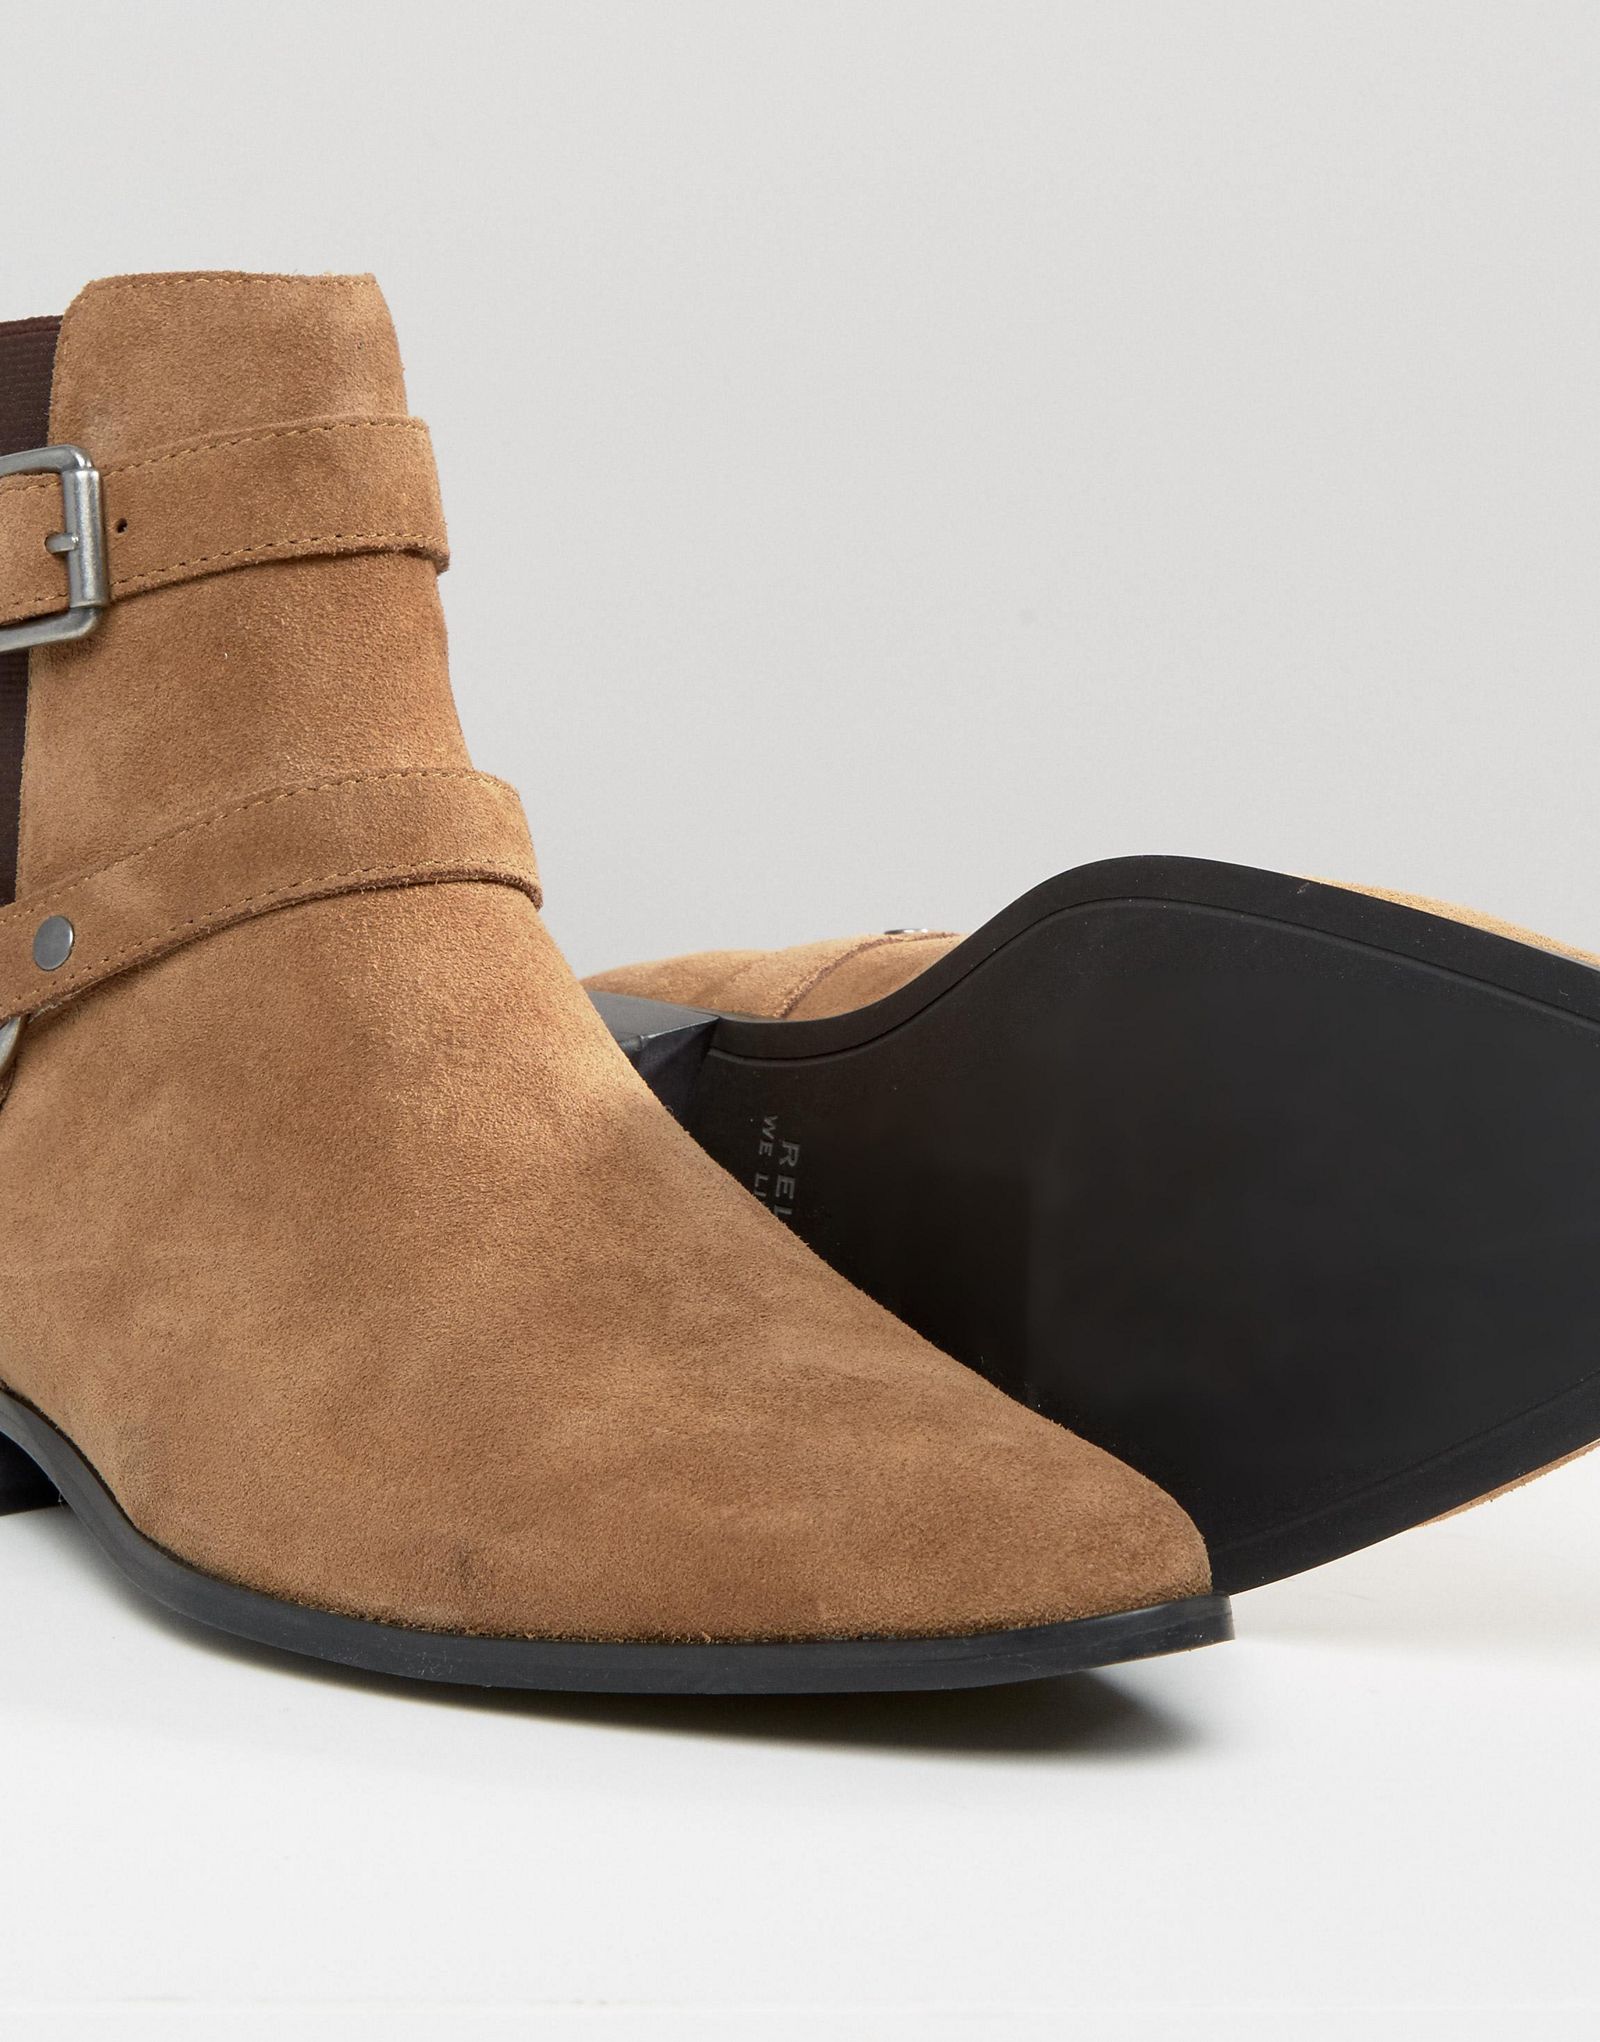 Religion Belter Suede Boots